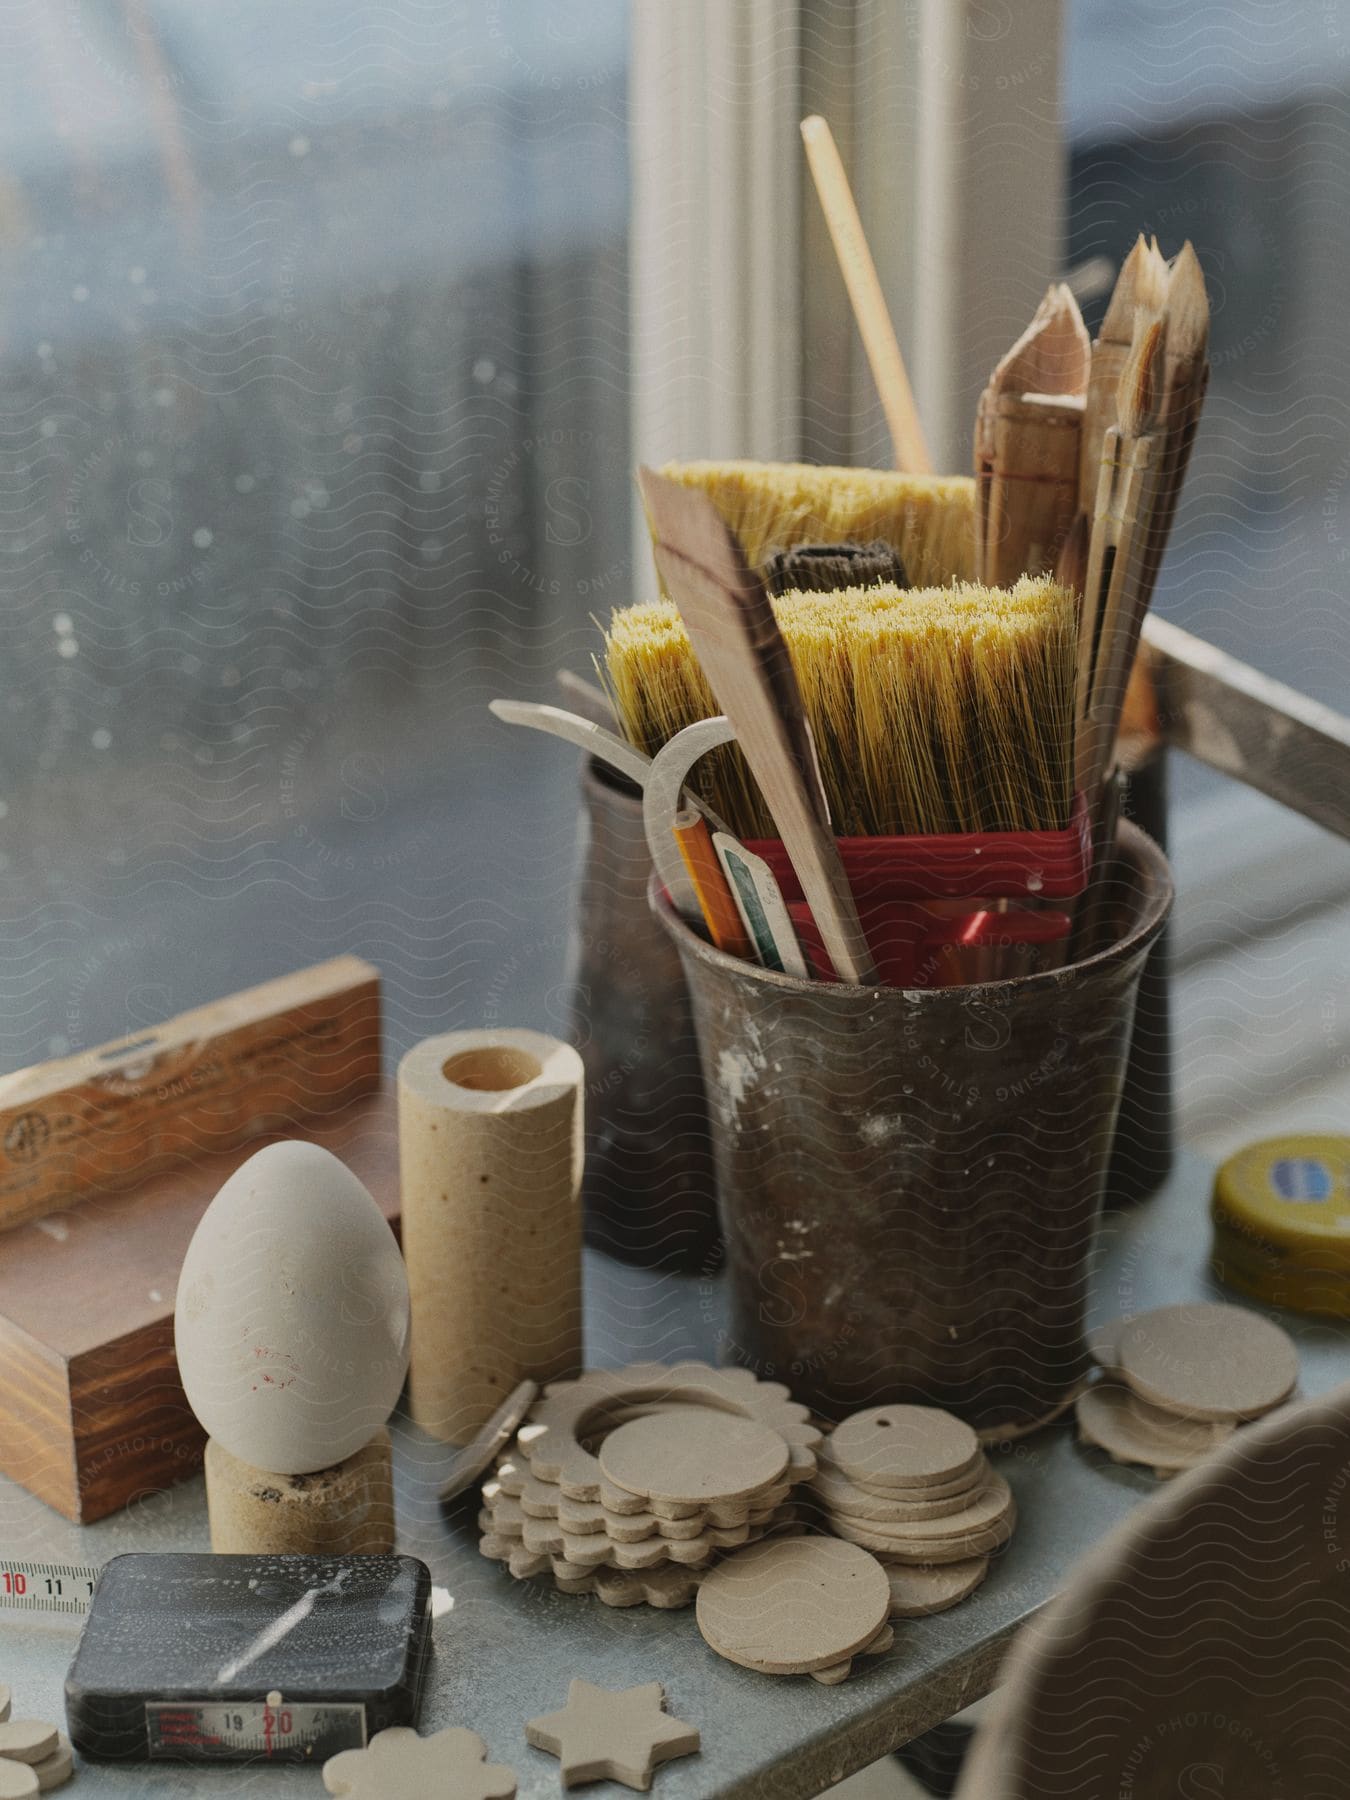 Paint brushes and tools in a canister next to wooden craft supplies and a tape measure on a table surface